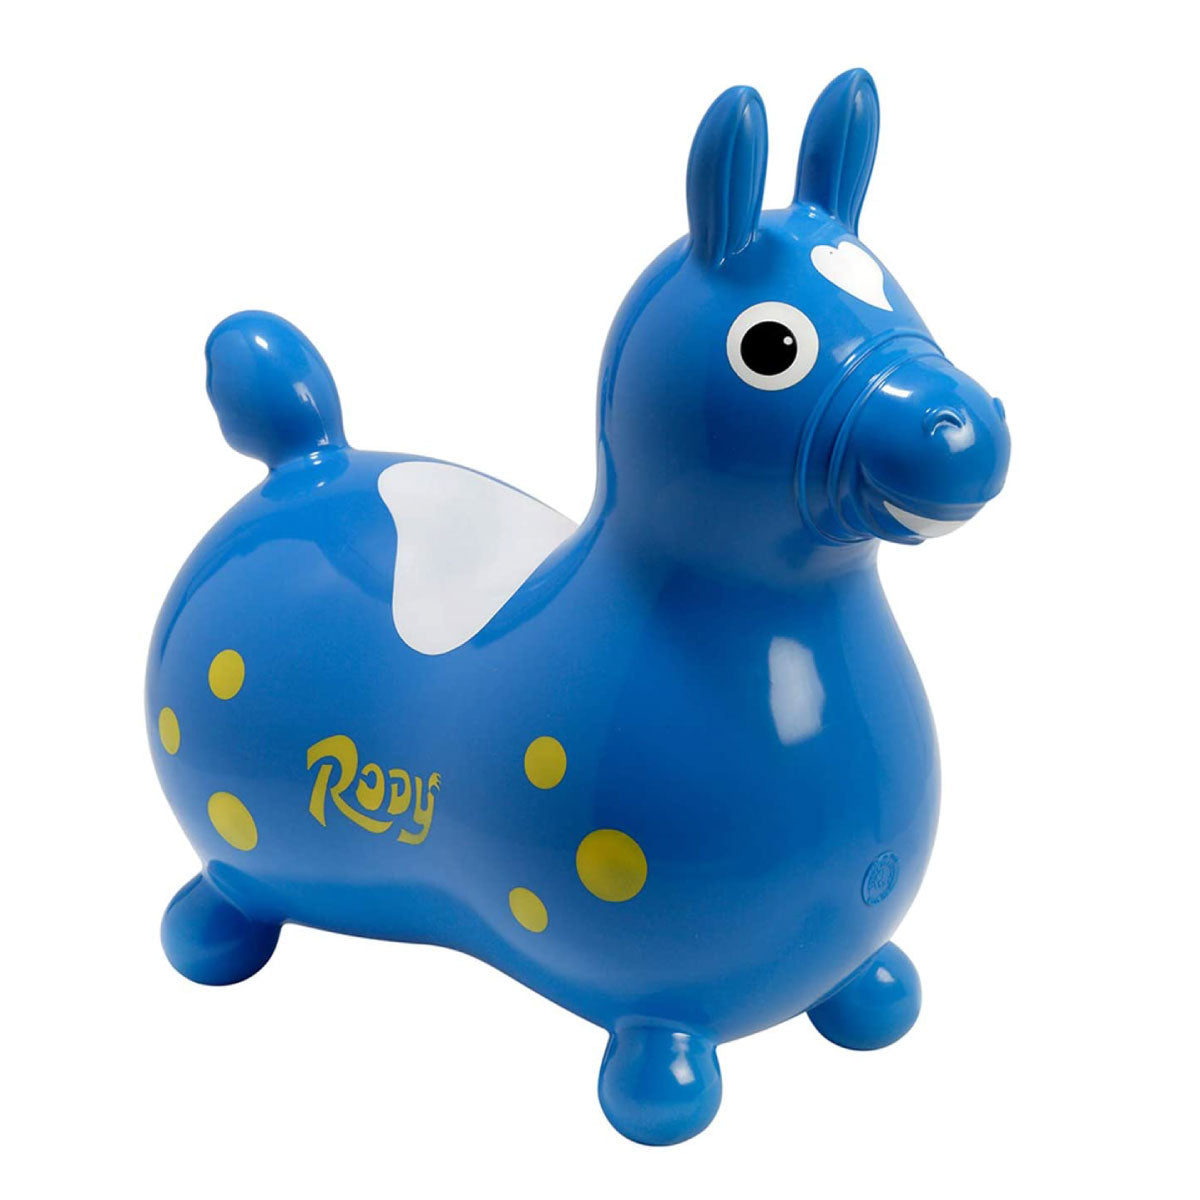 Blue Rody Horse from Gymnic